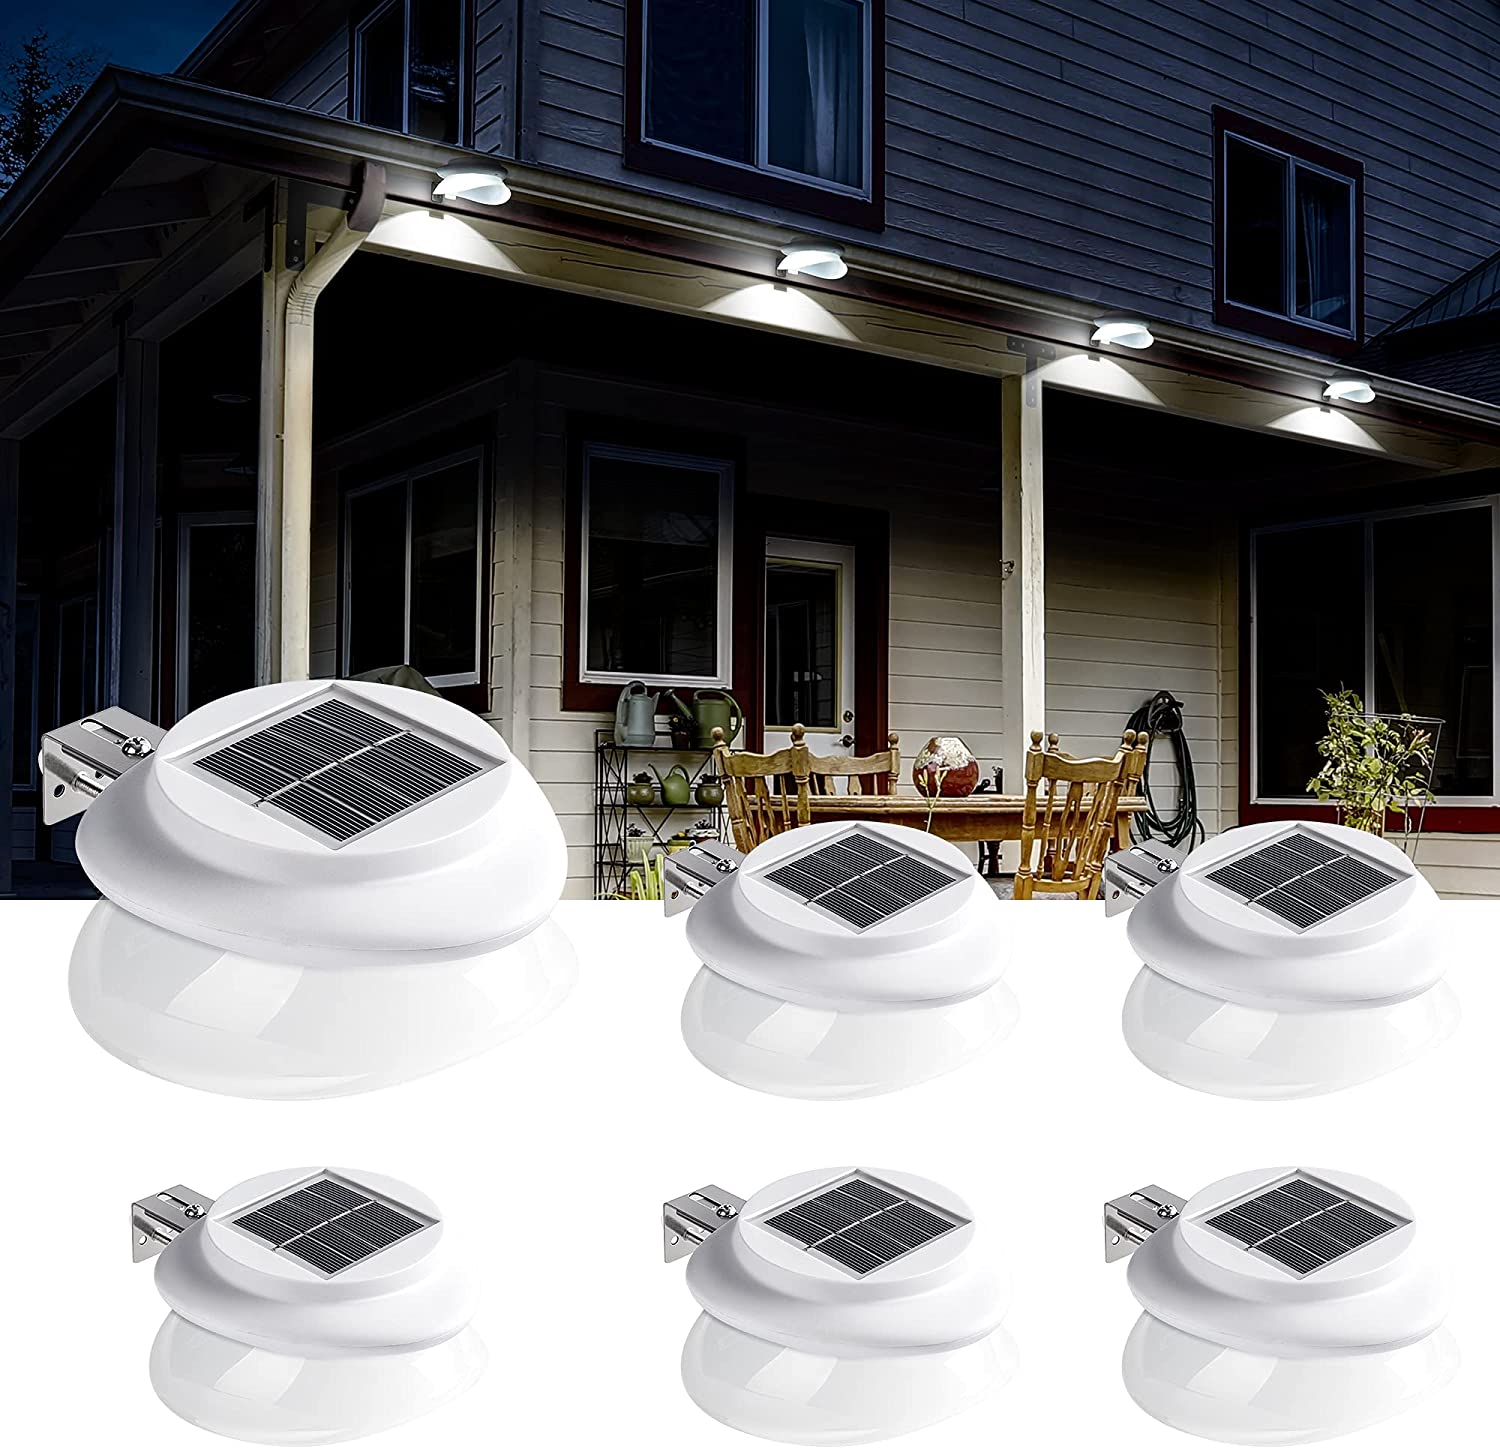 Solpex Auto Charging Outdoor Dusk-To-Dawn Solar Gutter Lights, 6-Pack